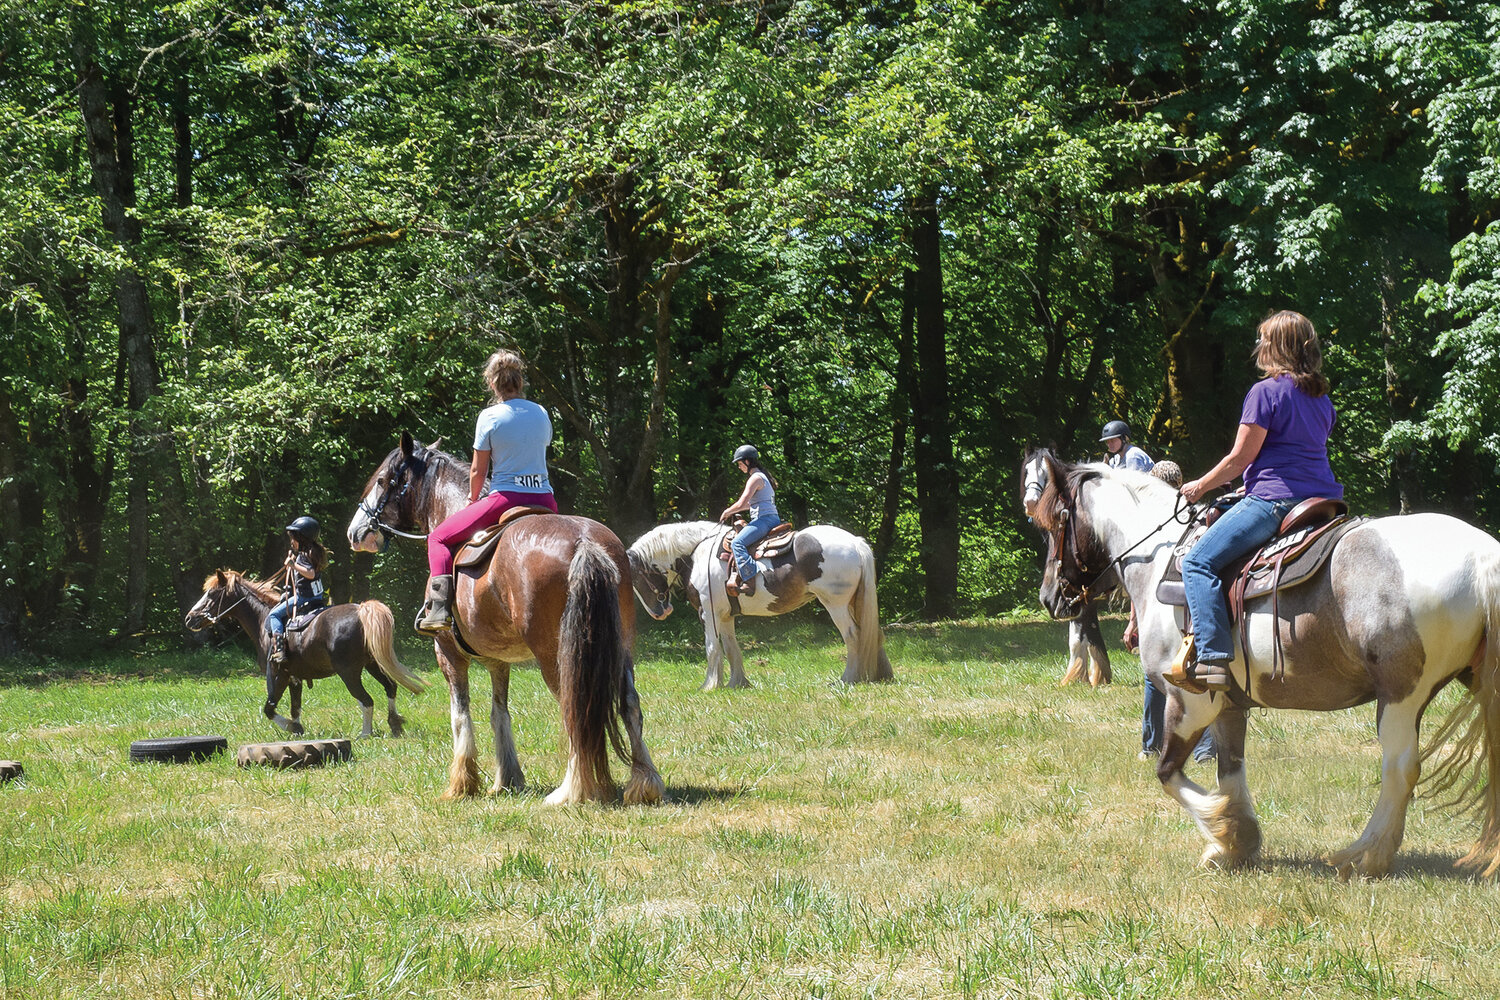 Horses and riders regroup ahead of another obstacle during the Clark County Saddle Club’s trail course event on June 3.